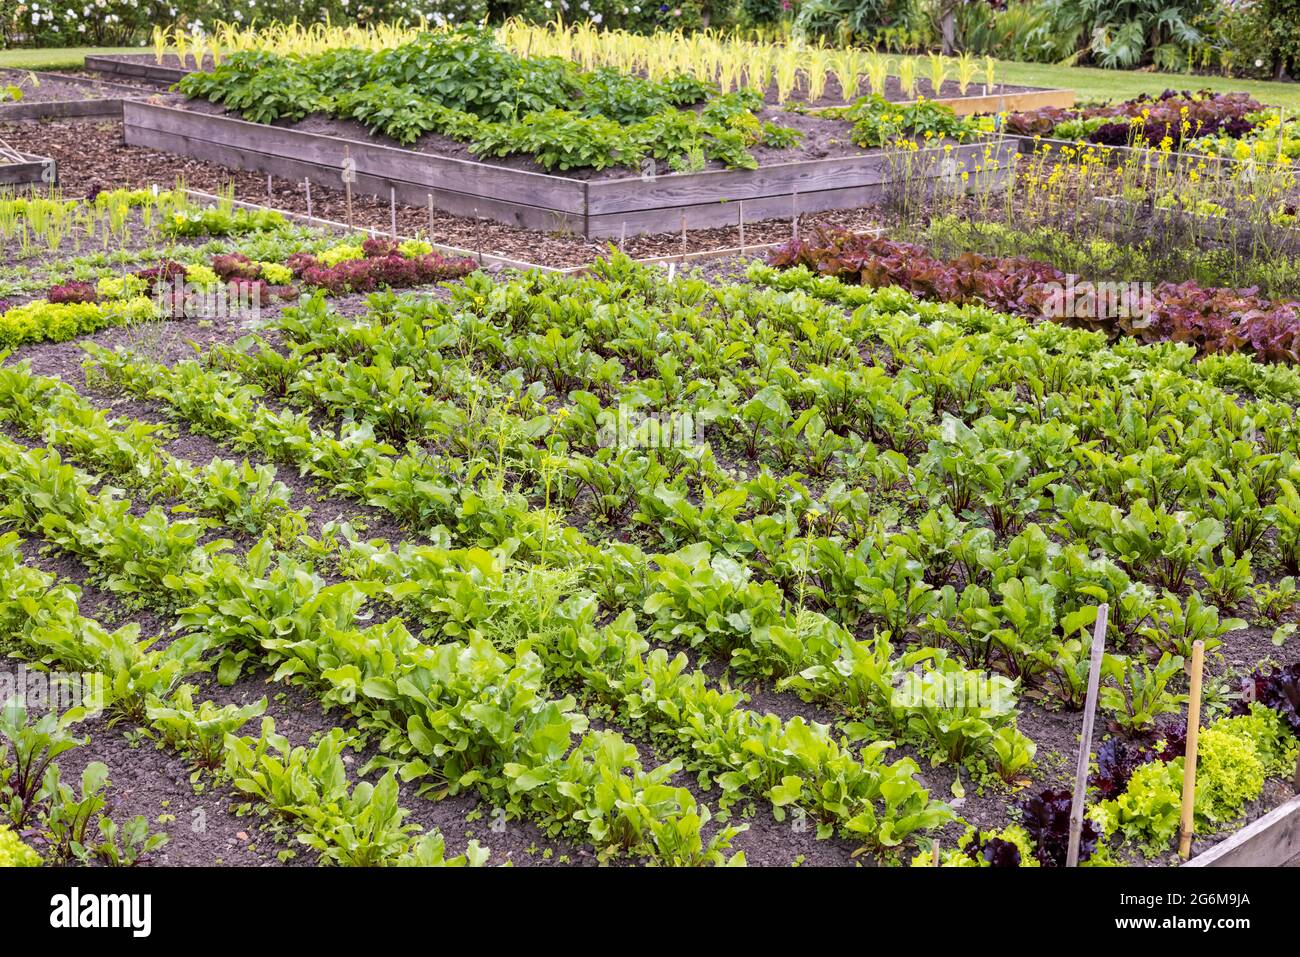 Potager garden with symmetrical garden beds growing rows of  vegetables with flowers, fruit and herbs intermingled. Stock Photo